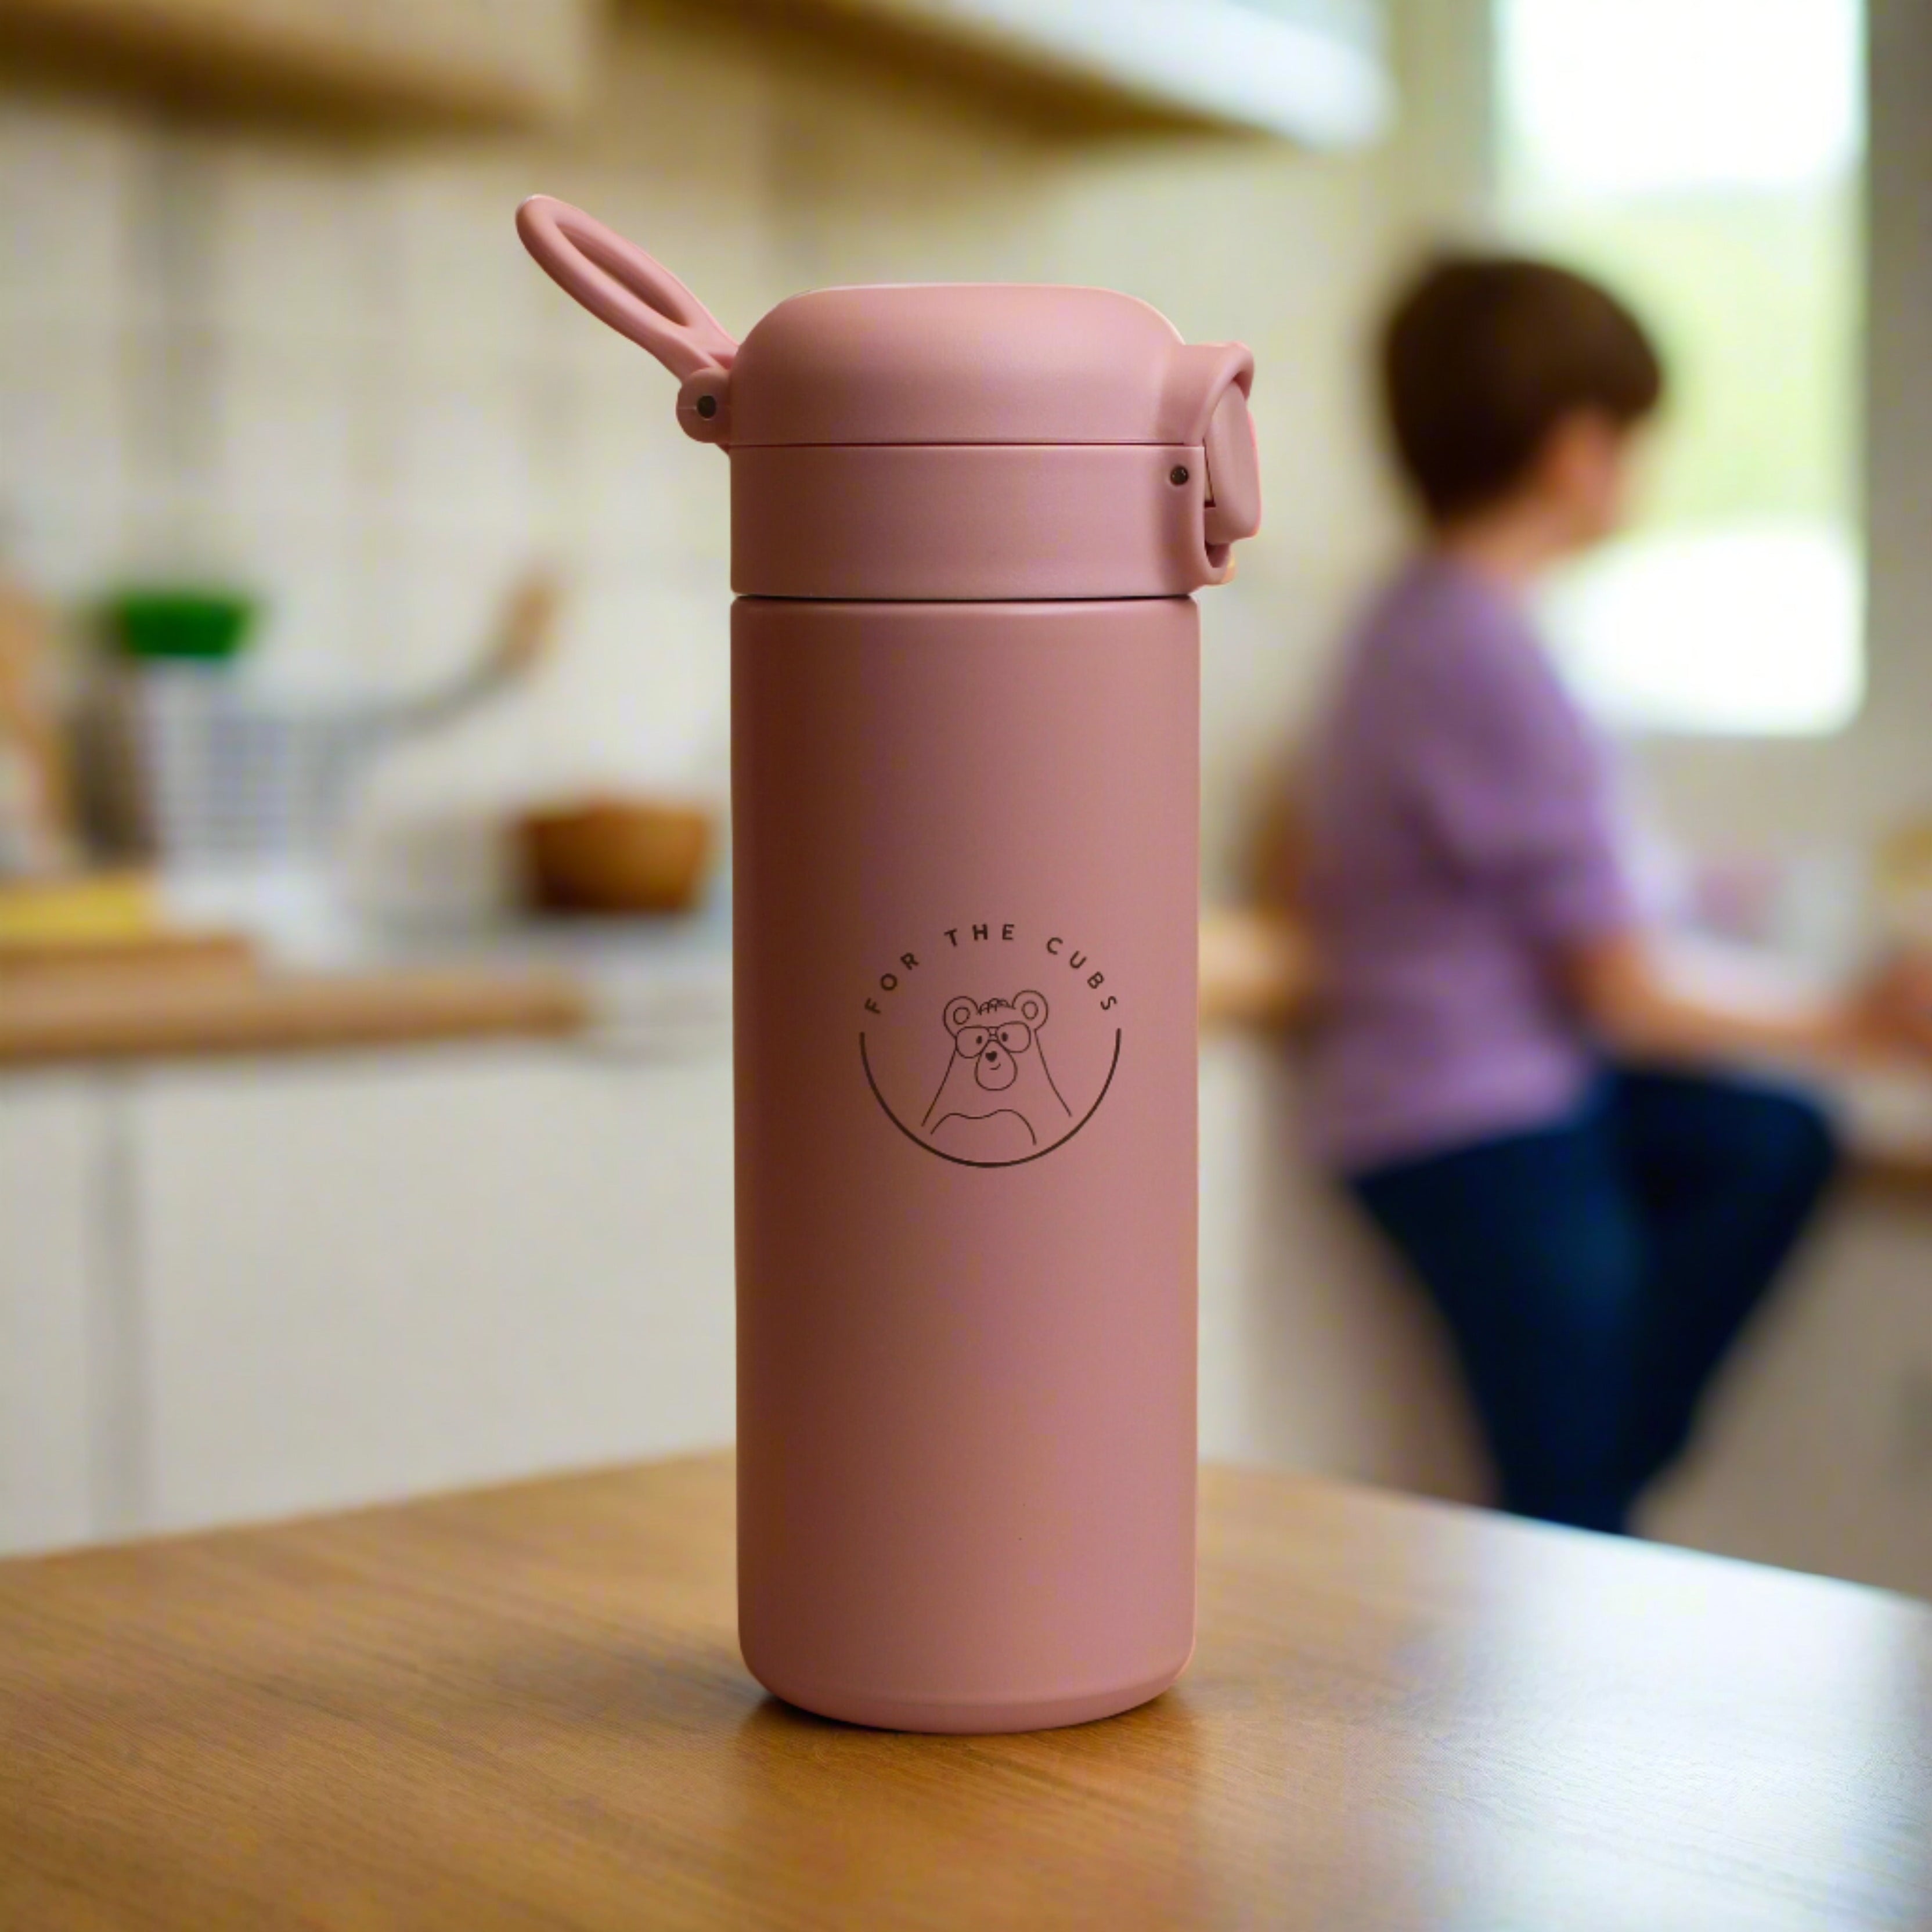 Pink water bottle front view and cap closed with loop showing